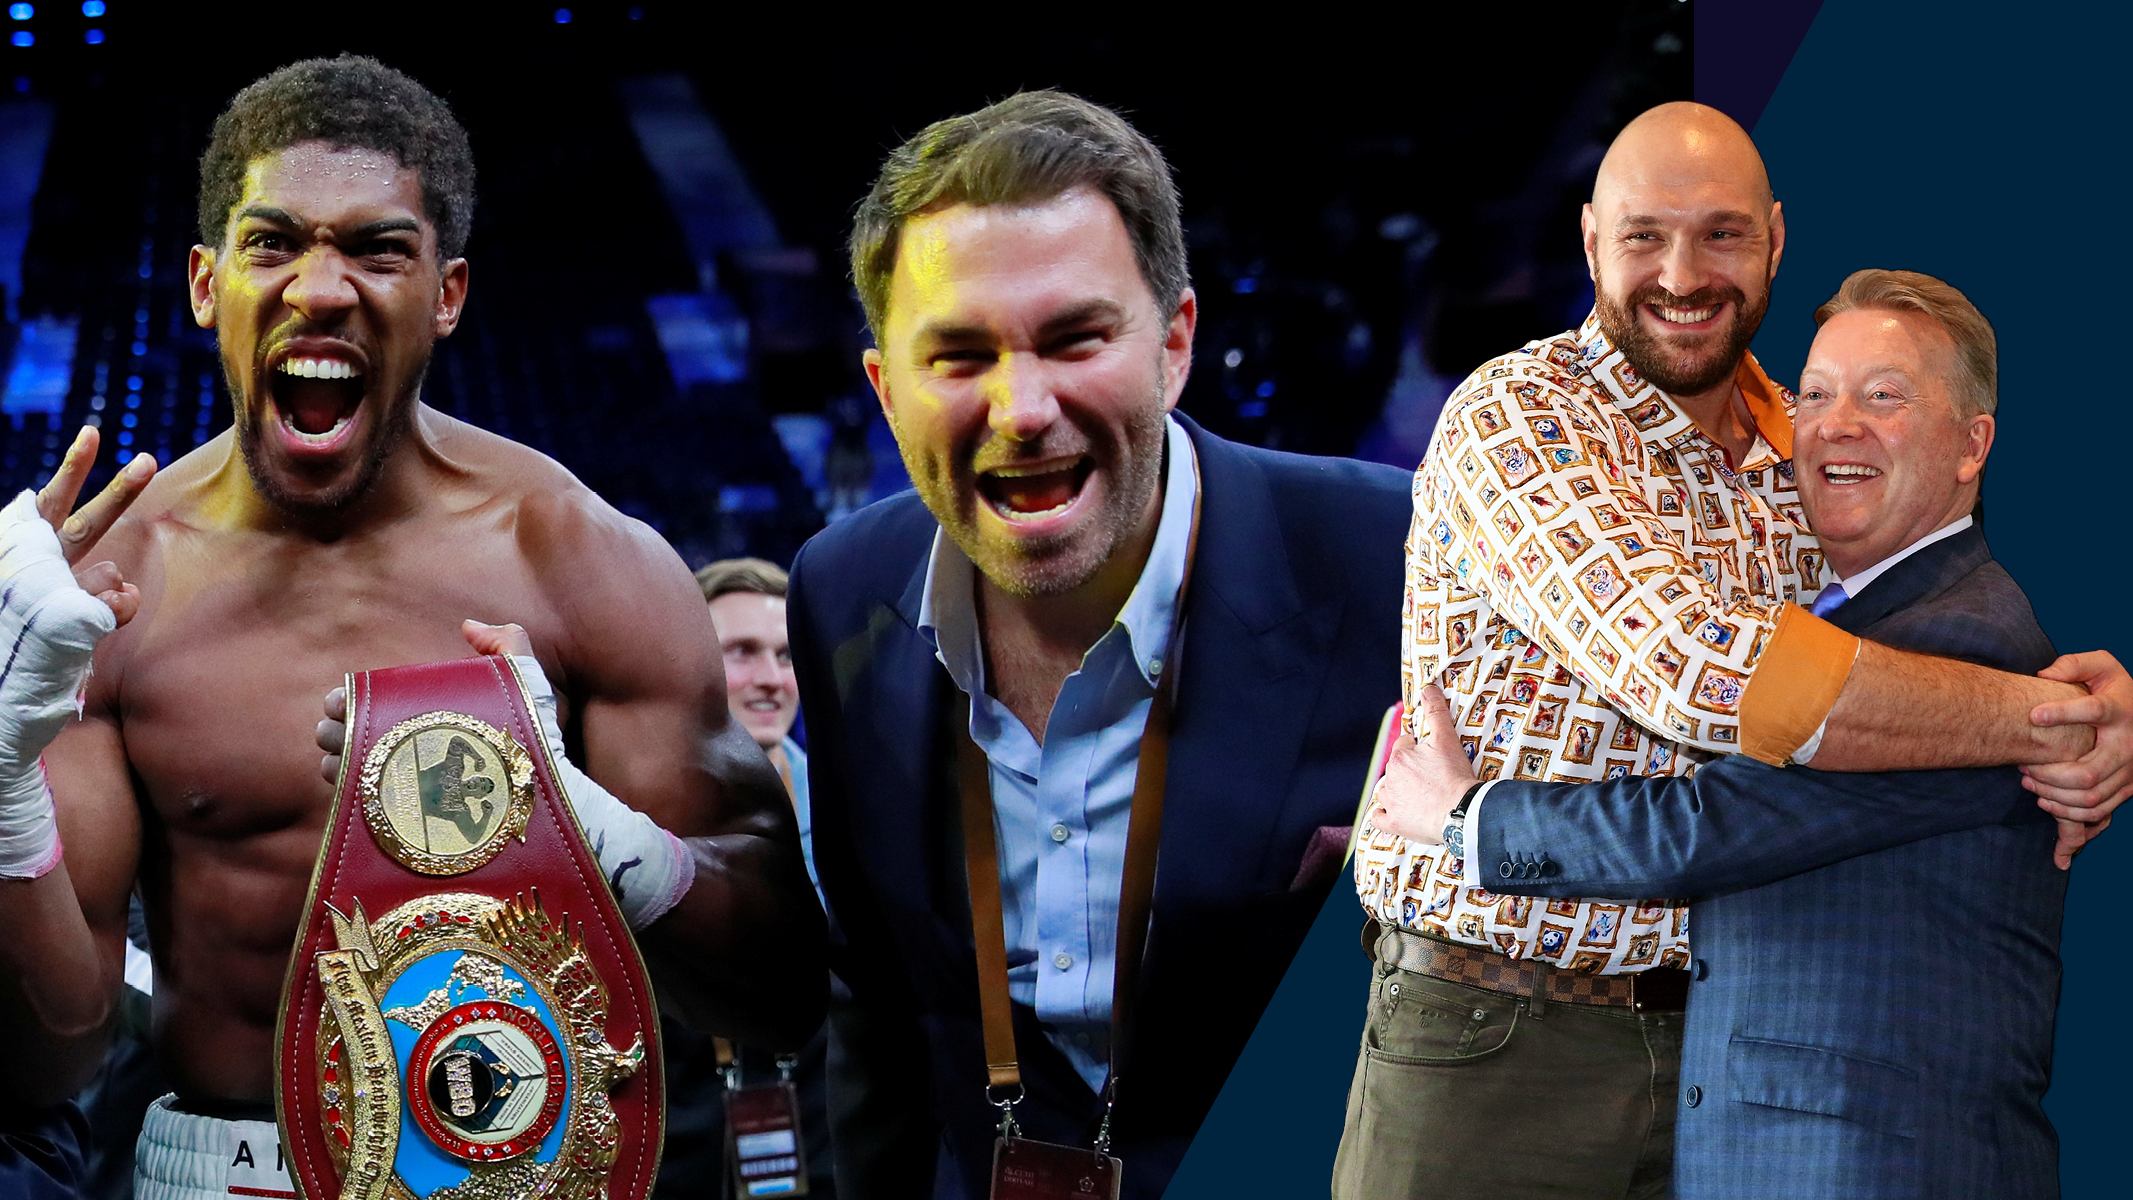 Joshua and Hearn, left, are set to be joined under contract with DAZN by Fury and Warren, right